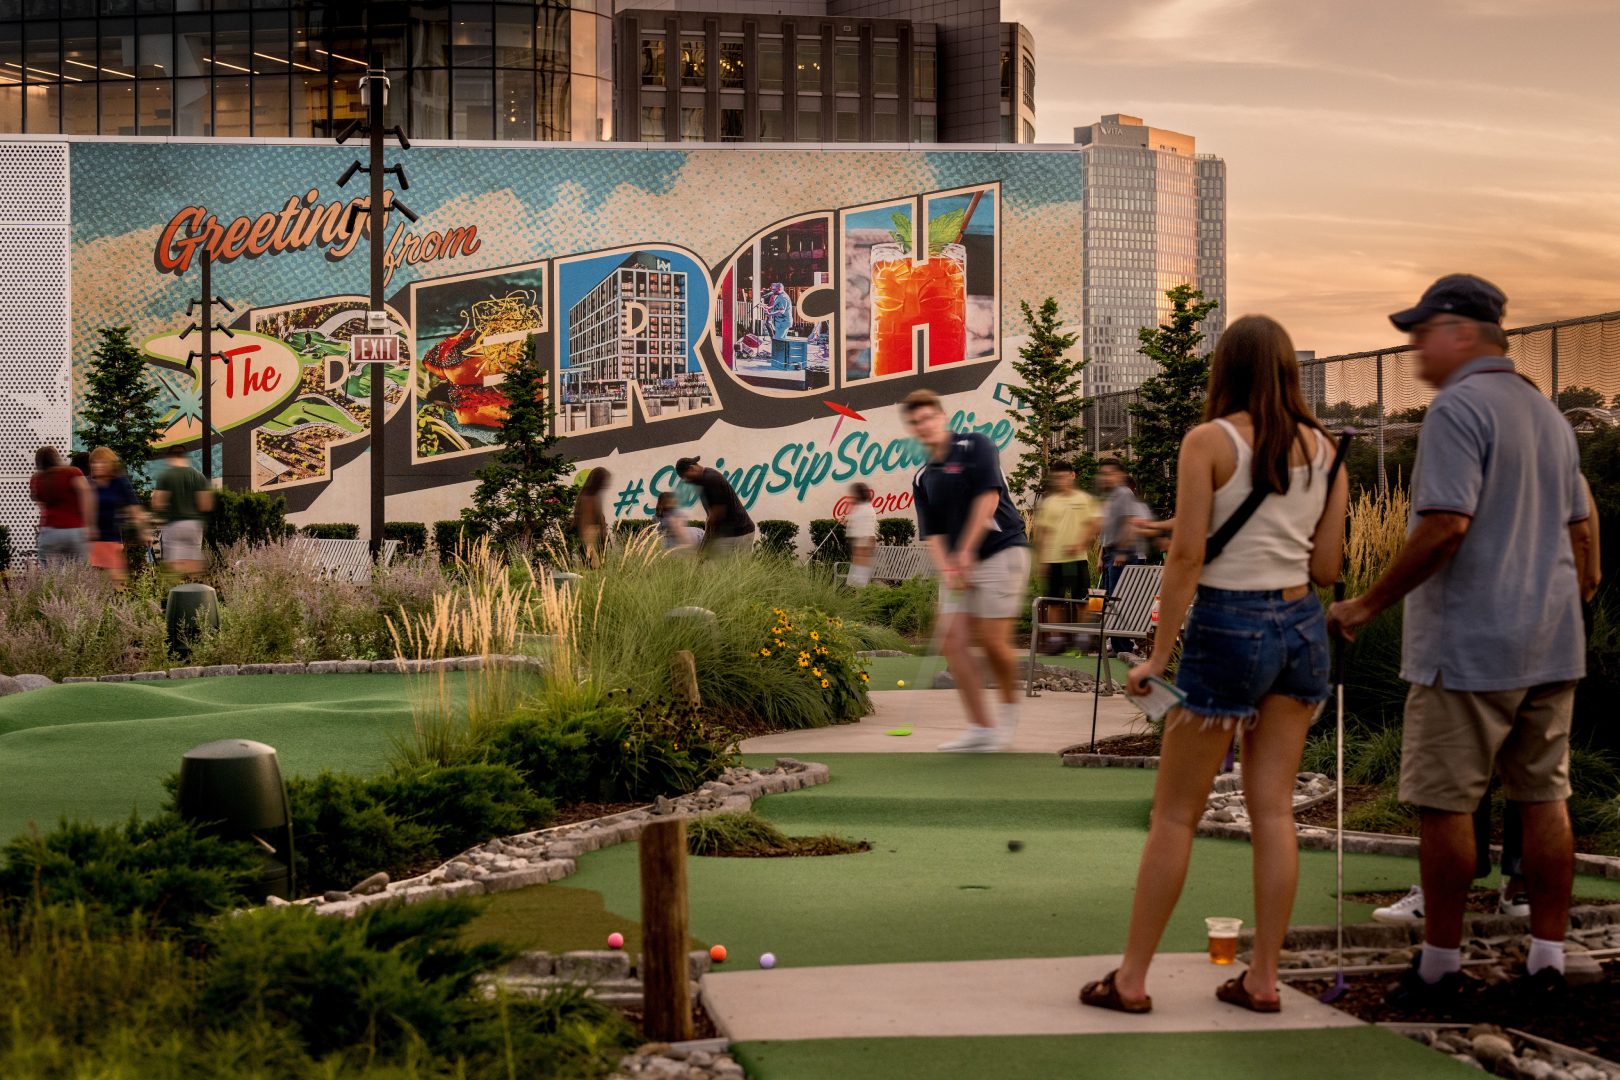 People standing in front of a mural welcoming them to the Perch where they are enjoying a game of mini golf